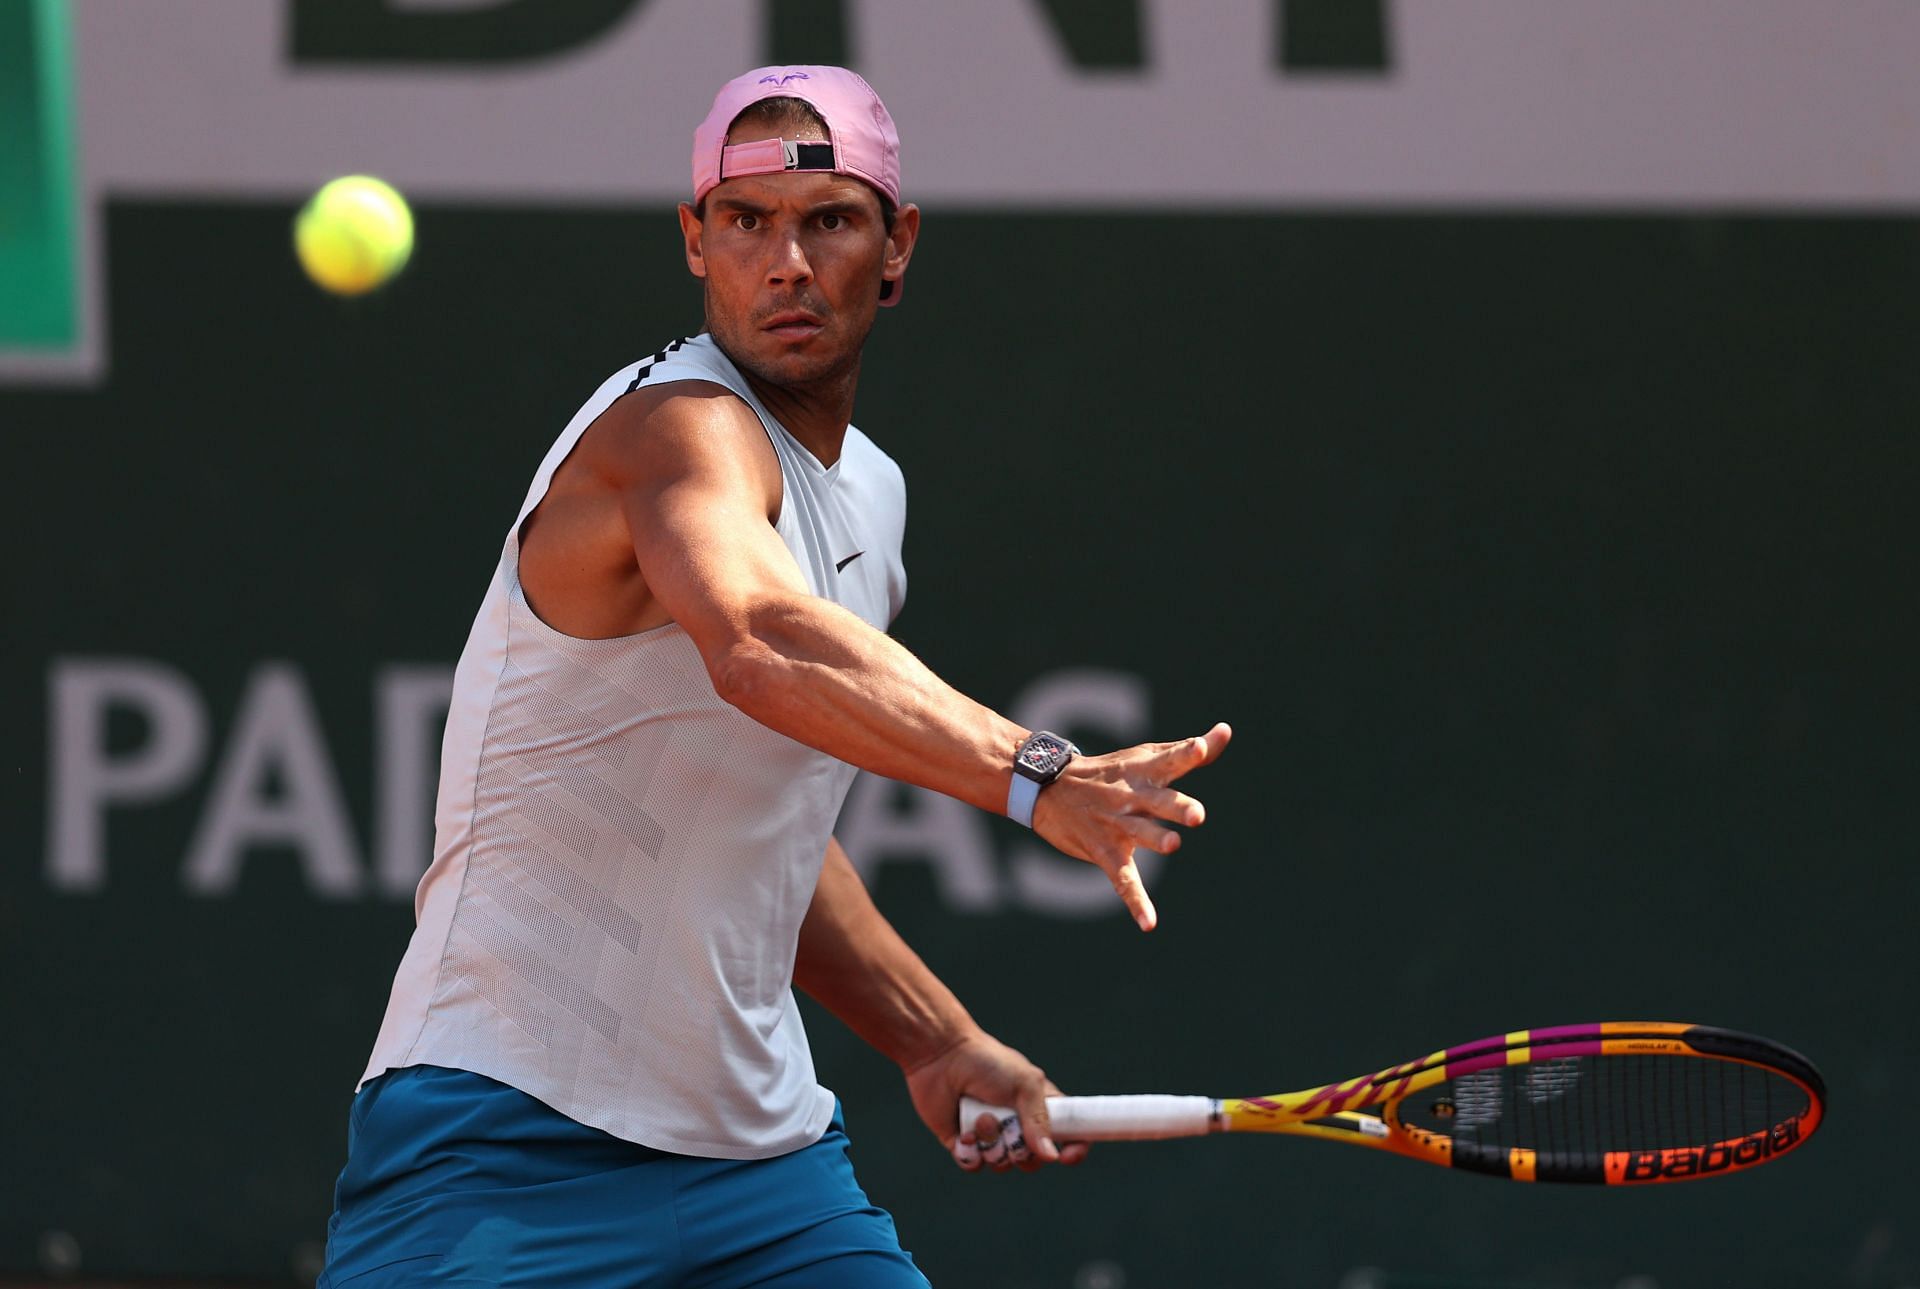 Rafael Nadal captured during a training session in May 2021